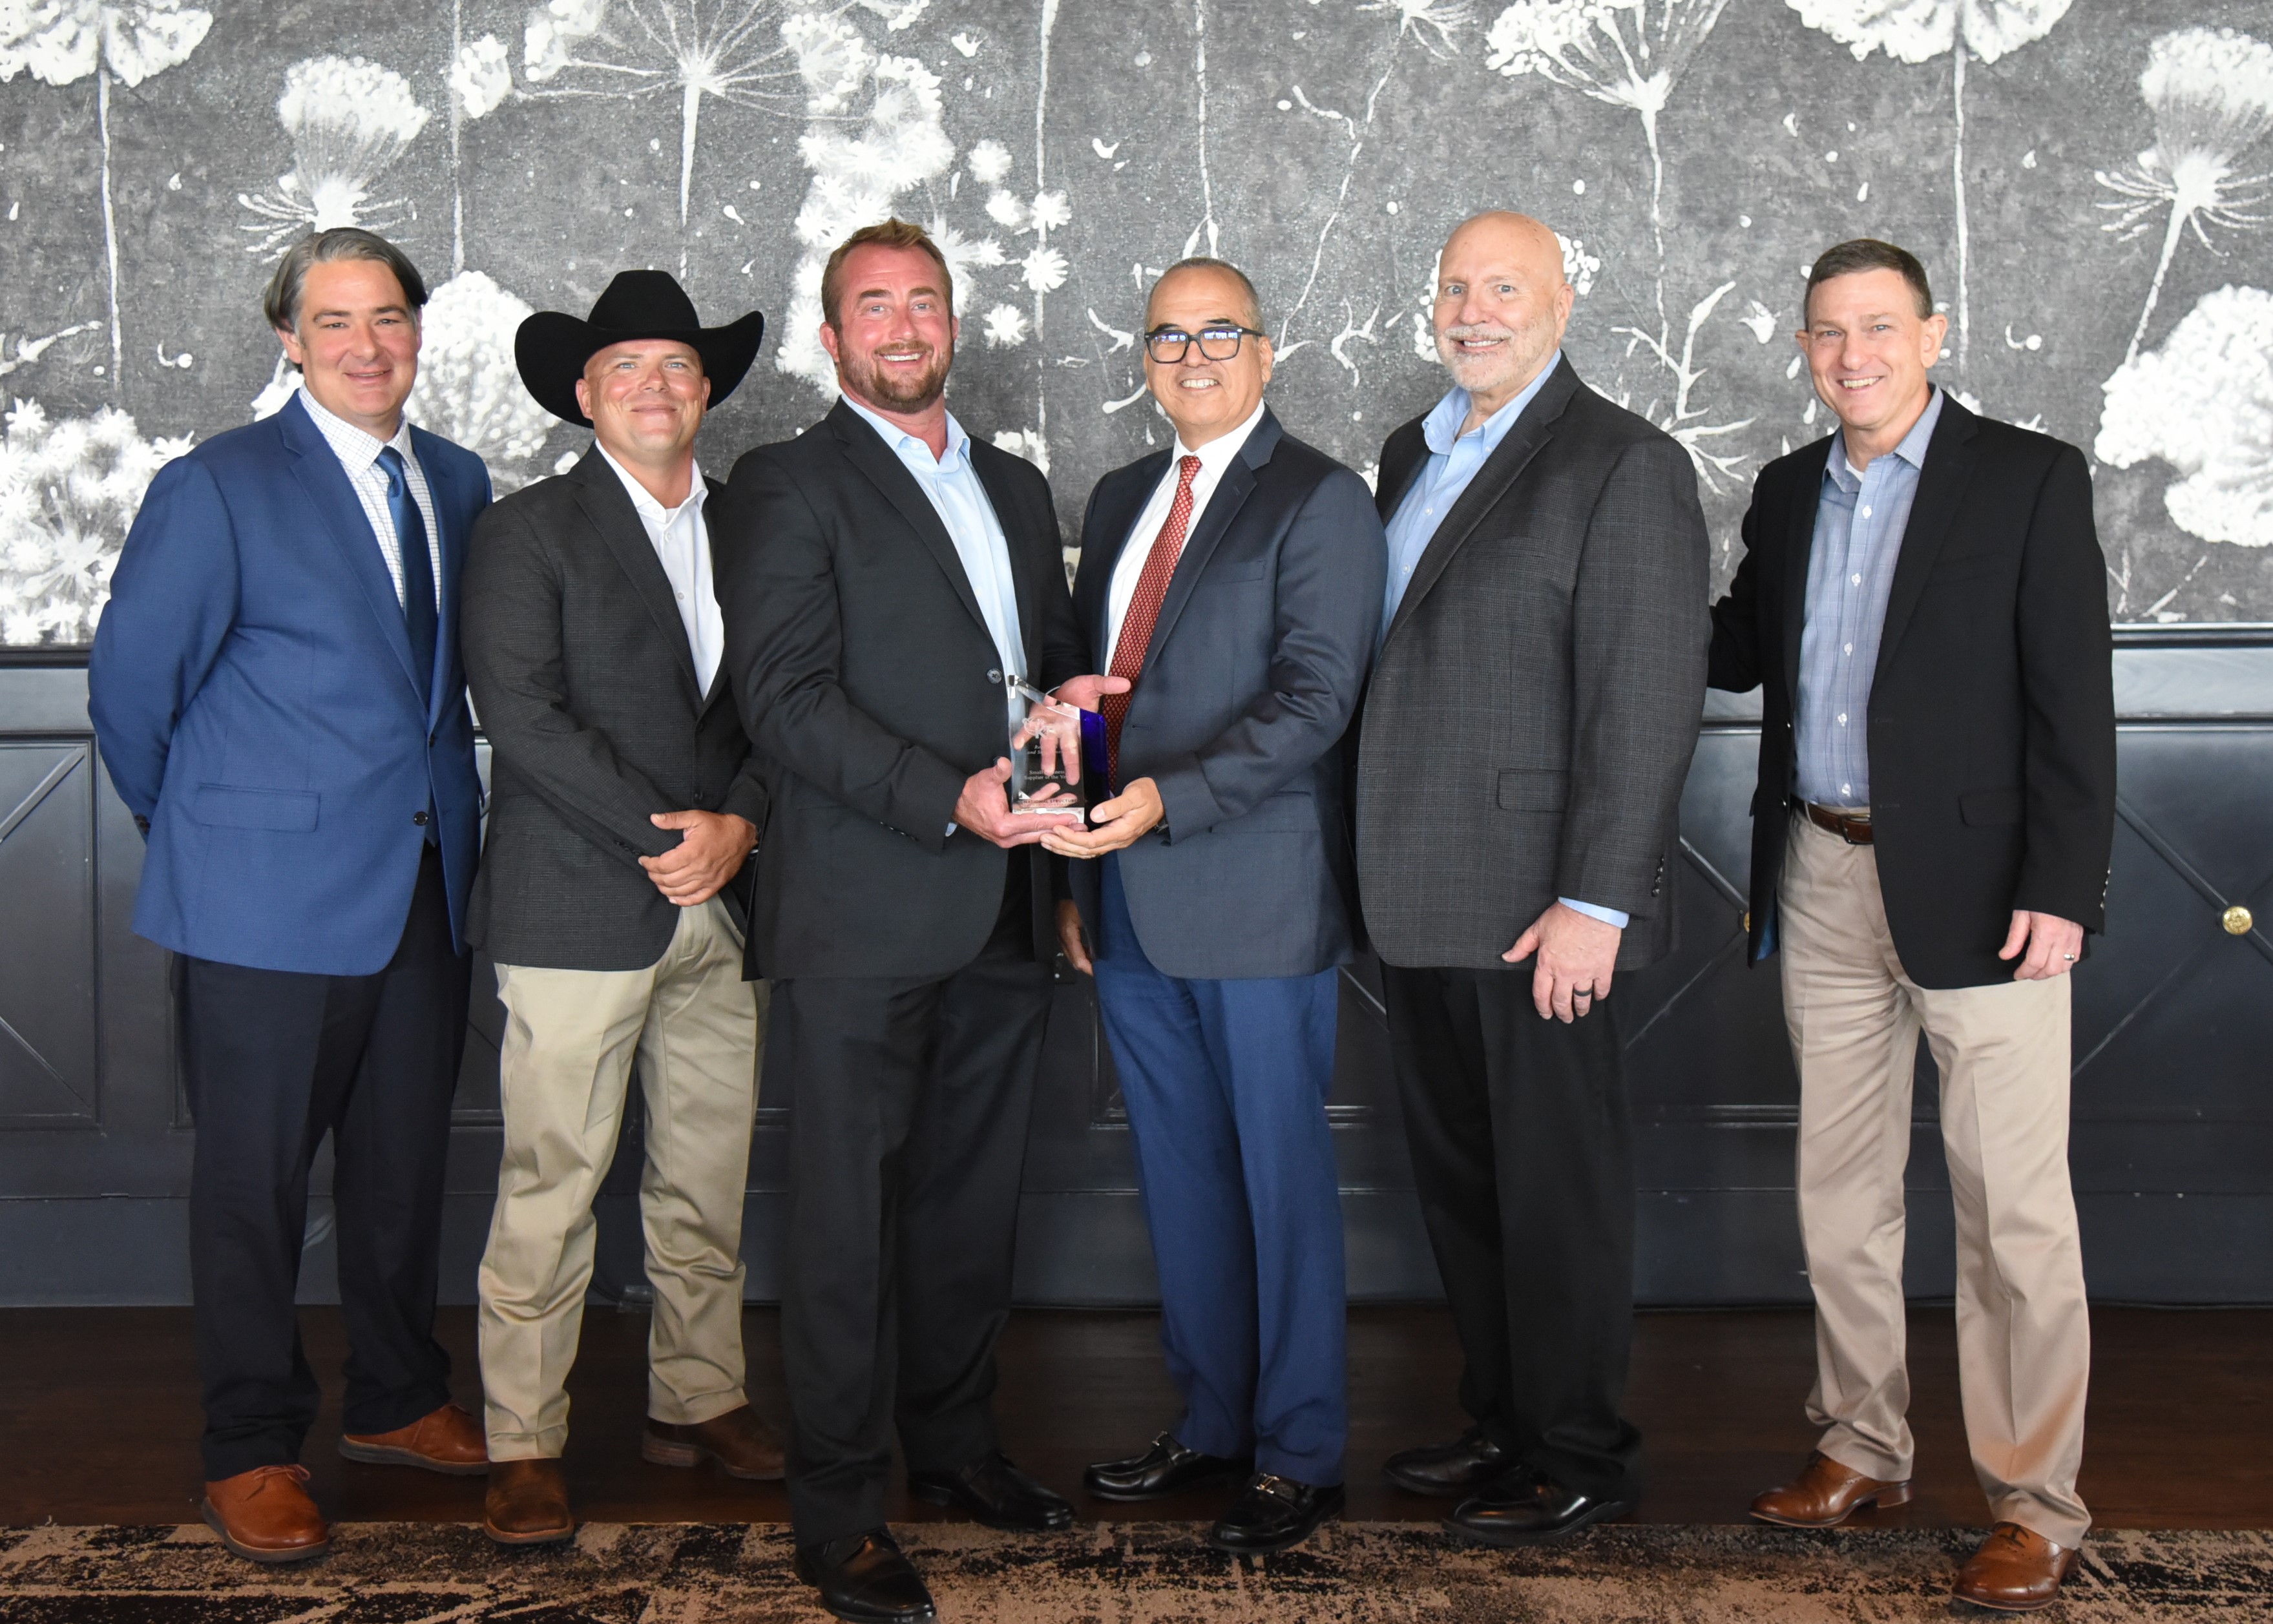 The 2021 award was given to National Structures of the RK Group in San Antonio, Texas